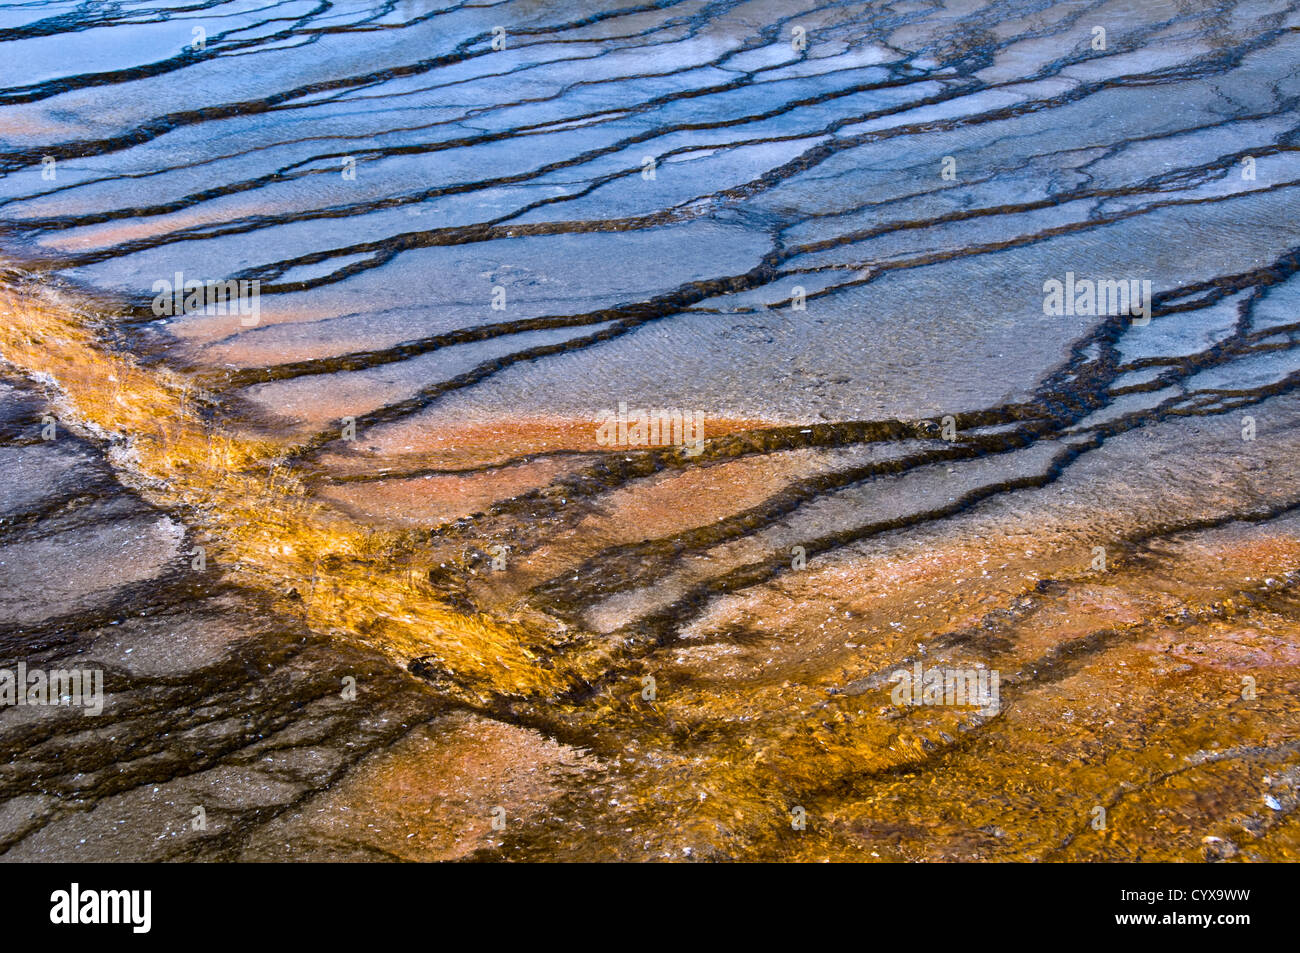 Detailed view of a hot spring - Midway Geyser Basin, Yellowstone national Park - Wyoming, USA Stock Photo